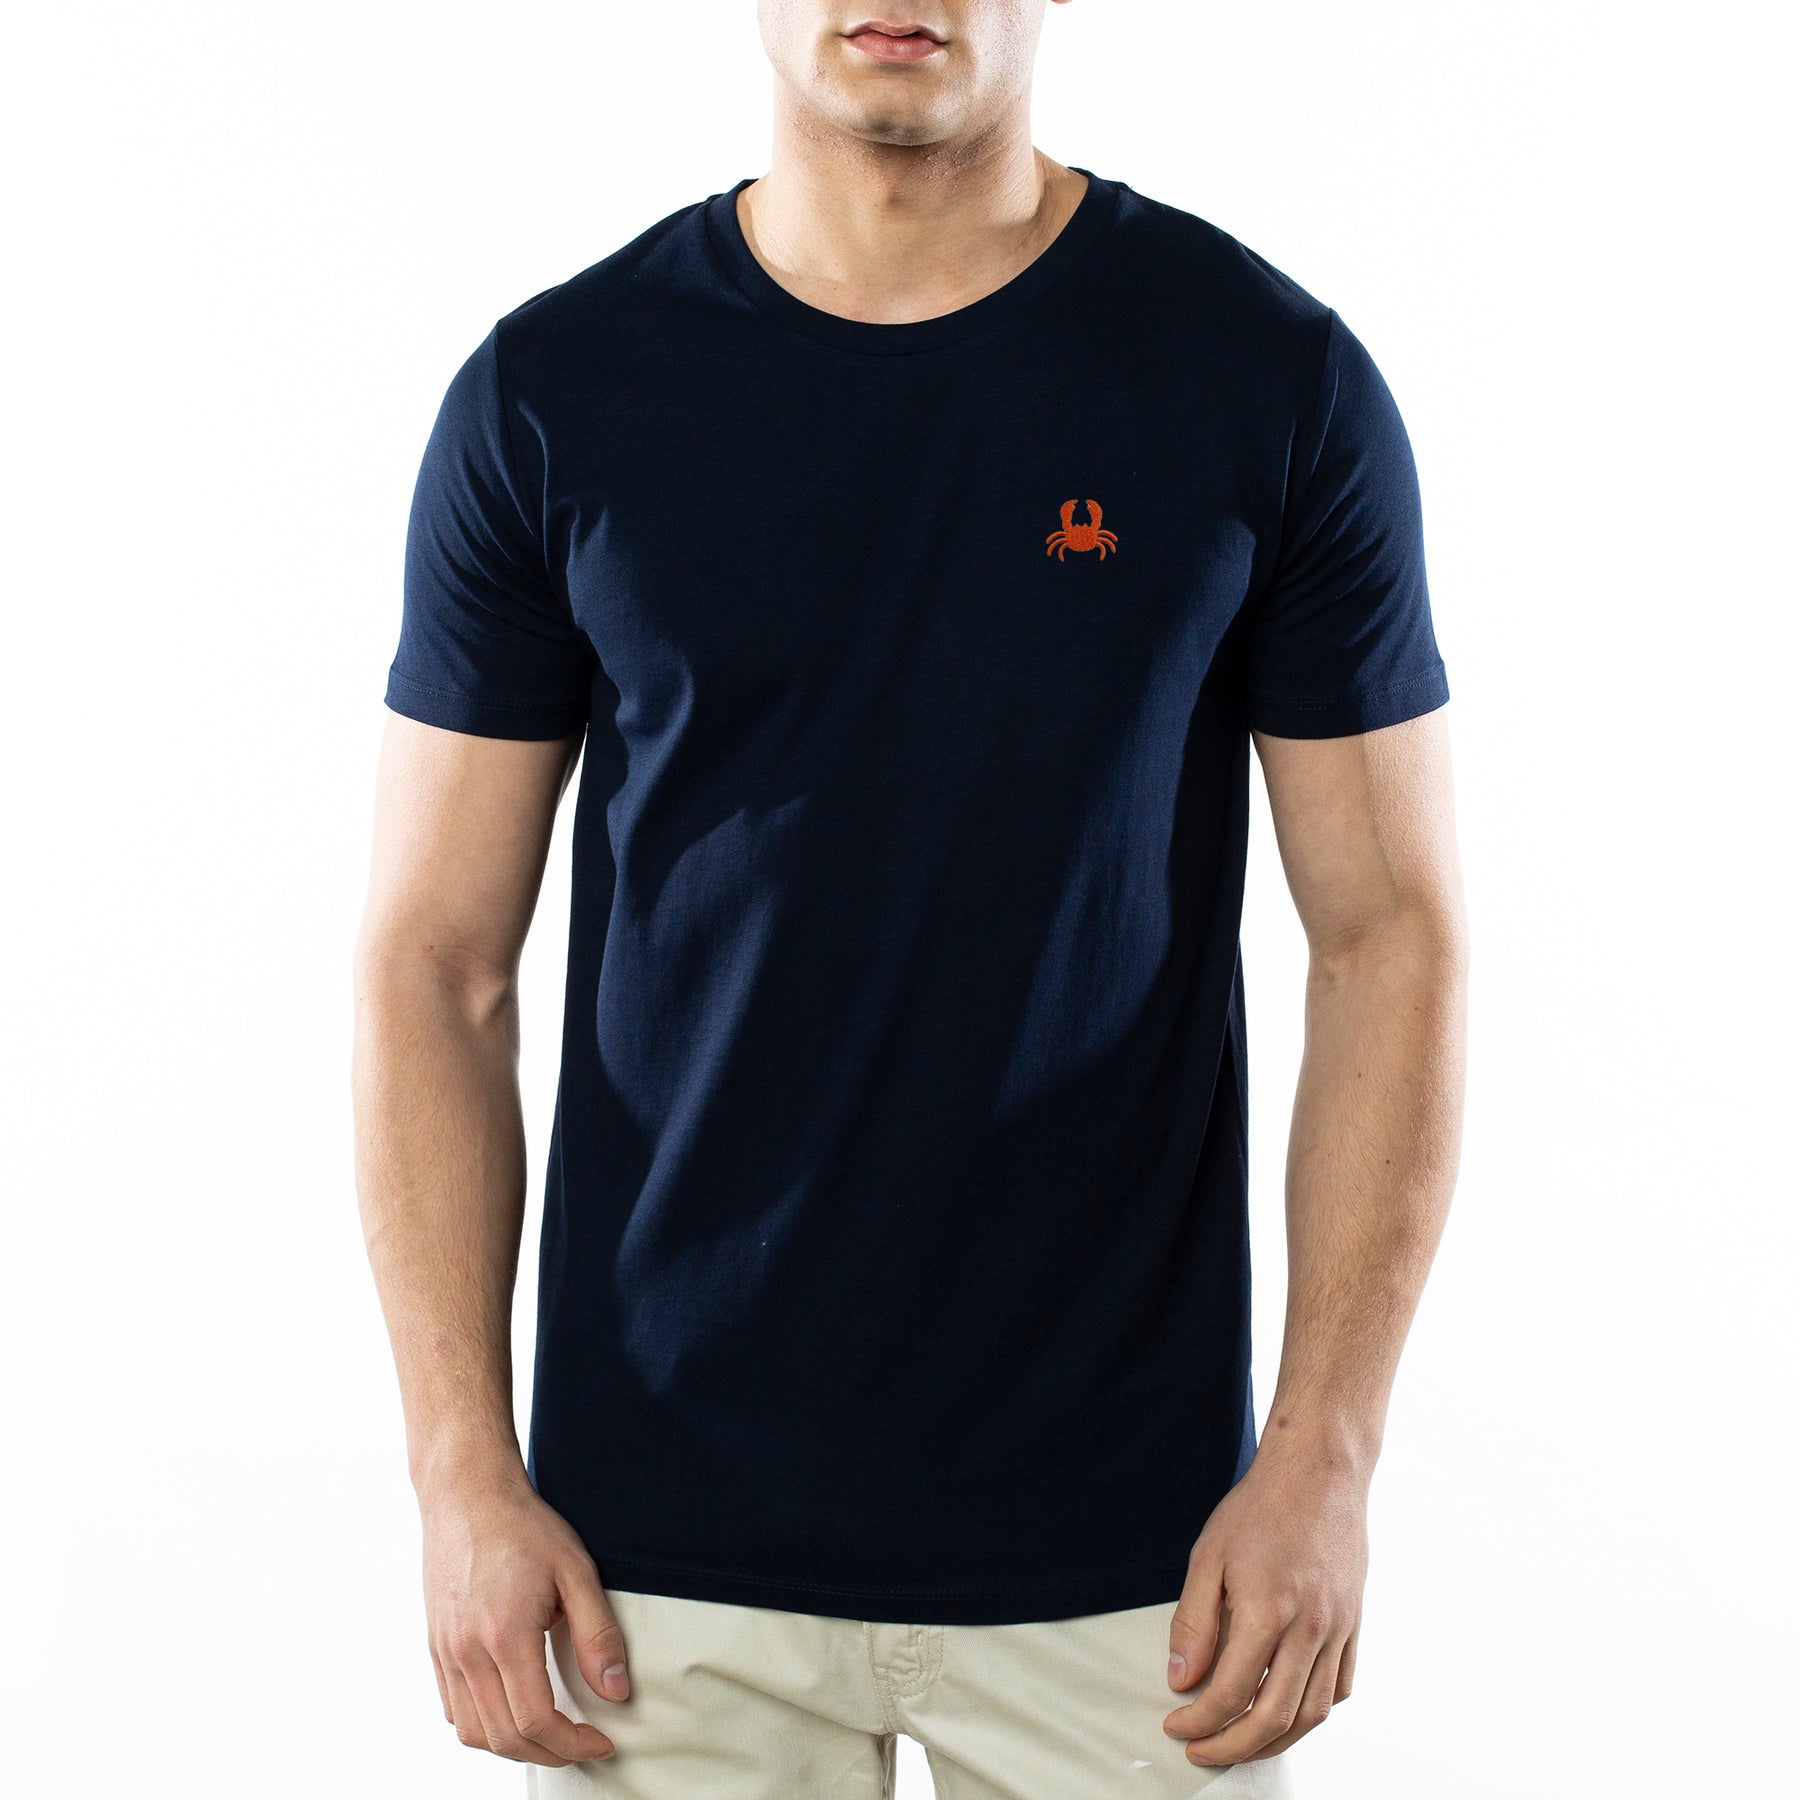 Navy T-Shirt. Embroidered Crab